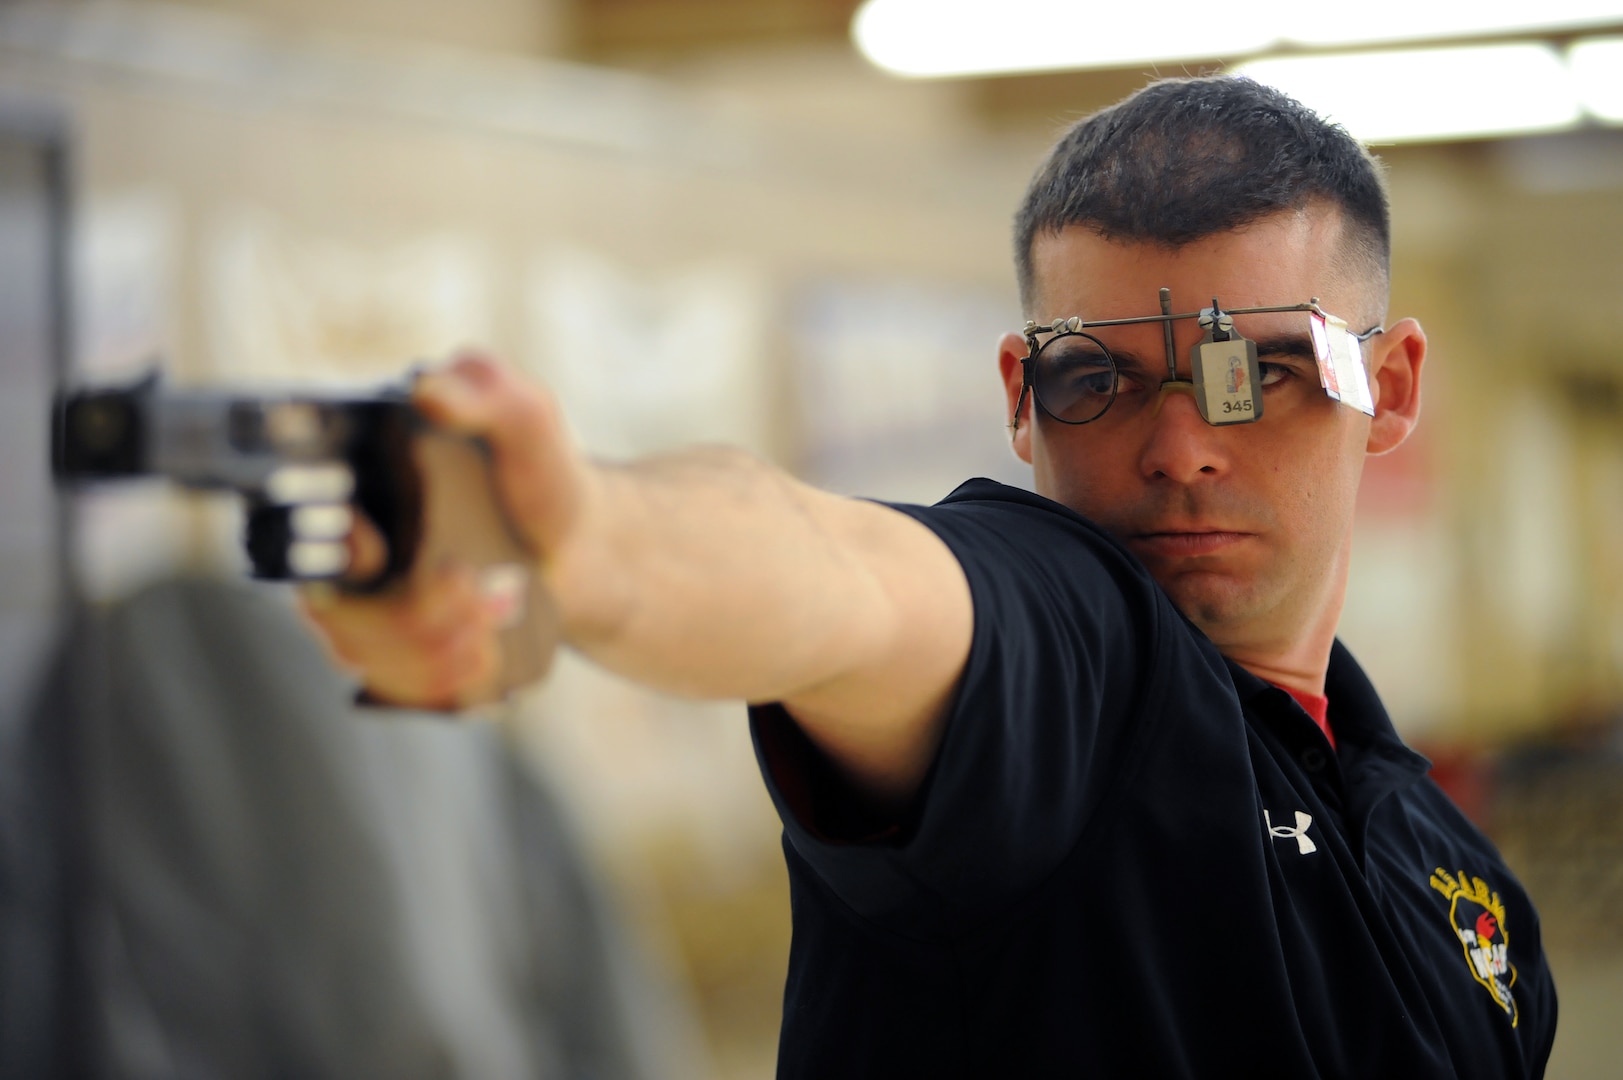 Sgt. 1st Class Keith Sanderson of the U.S. Army World Class Athlete Program, seen here practicing at the U.S. Olympic Training Center in Colorado Springs, Colo., has been selected for his third U.S. Olympic Team and will compete in the men's 25-meter rapid fire pistol event at the 2016 Rio Olympic Games. U.S. Army photo by Tim Hipps, IMCOM Public Affairs